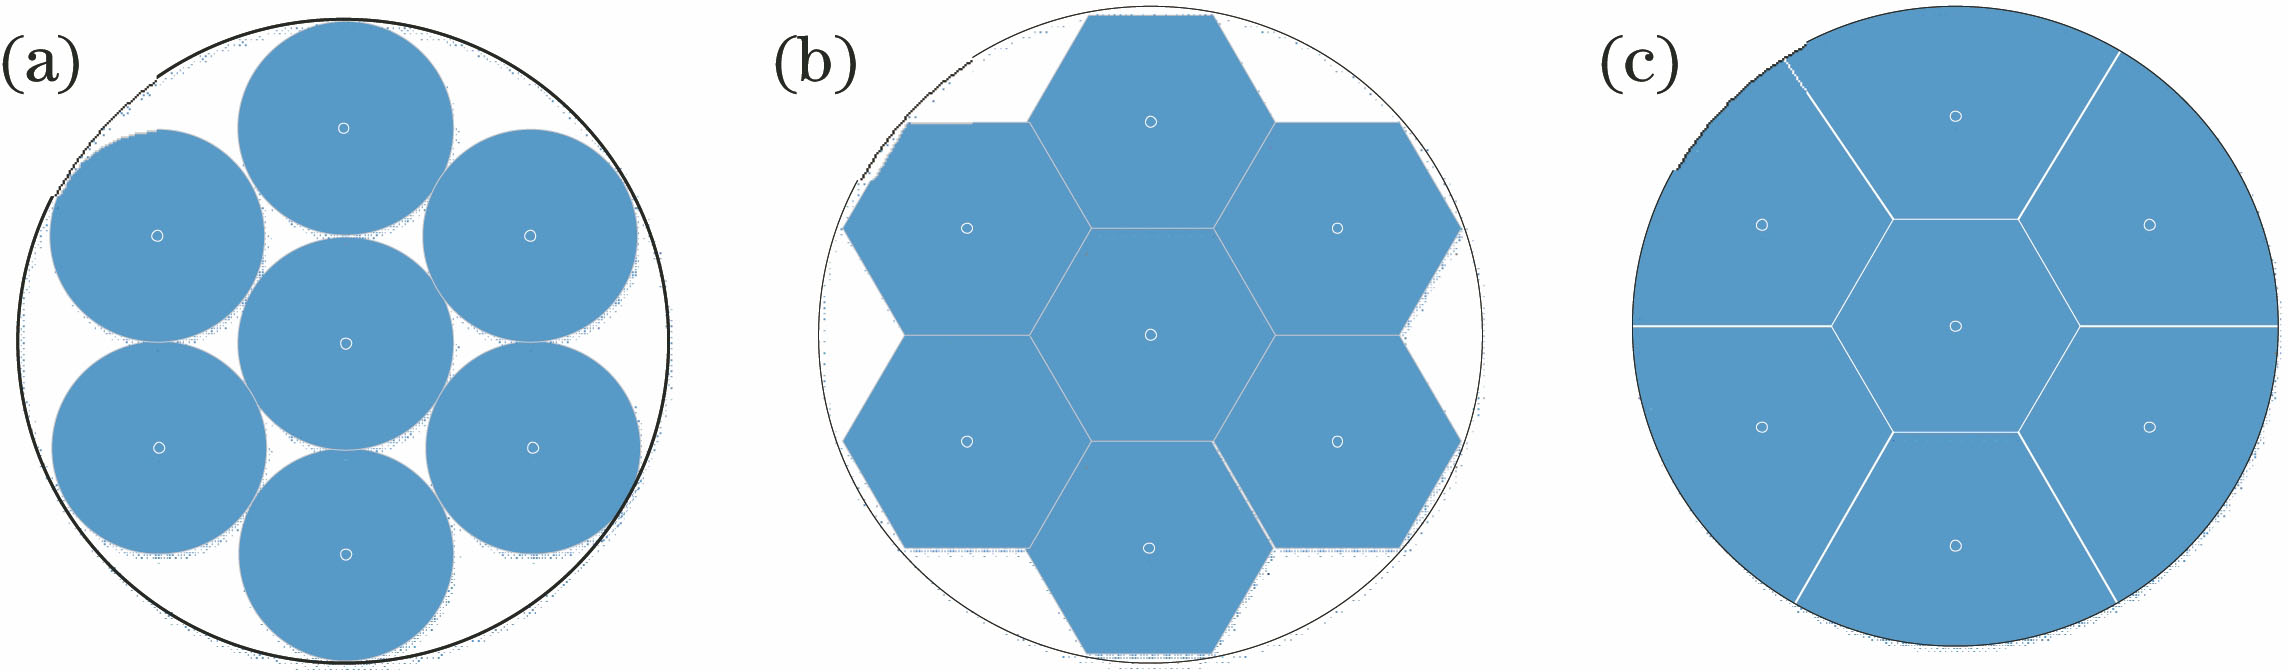 Three filling schemes with different sub-aperture shapes. (a) Circle; (b) hexagon; (c) combination